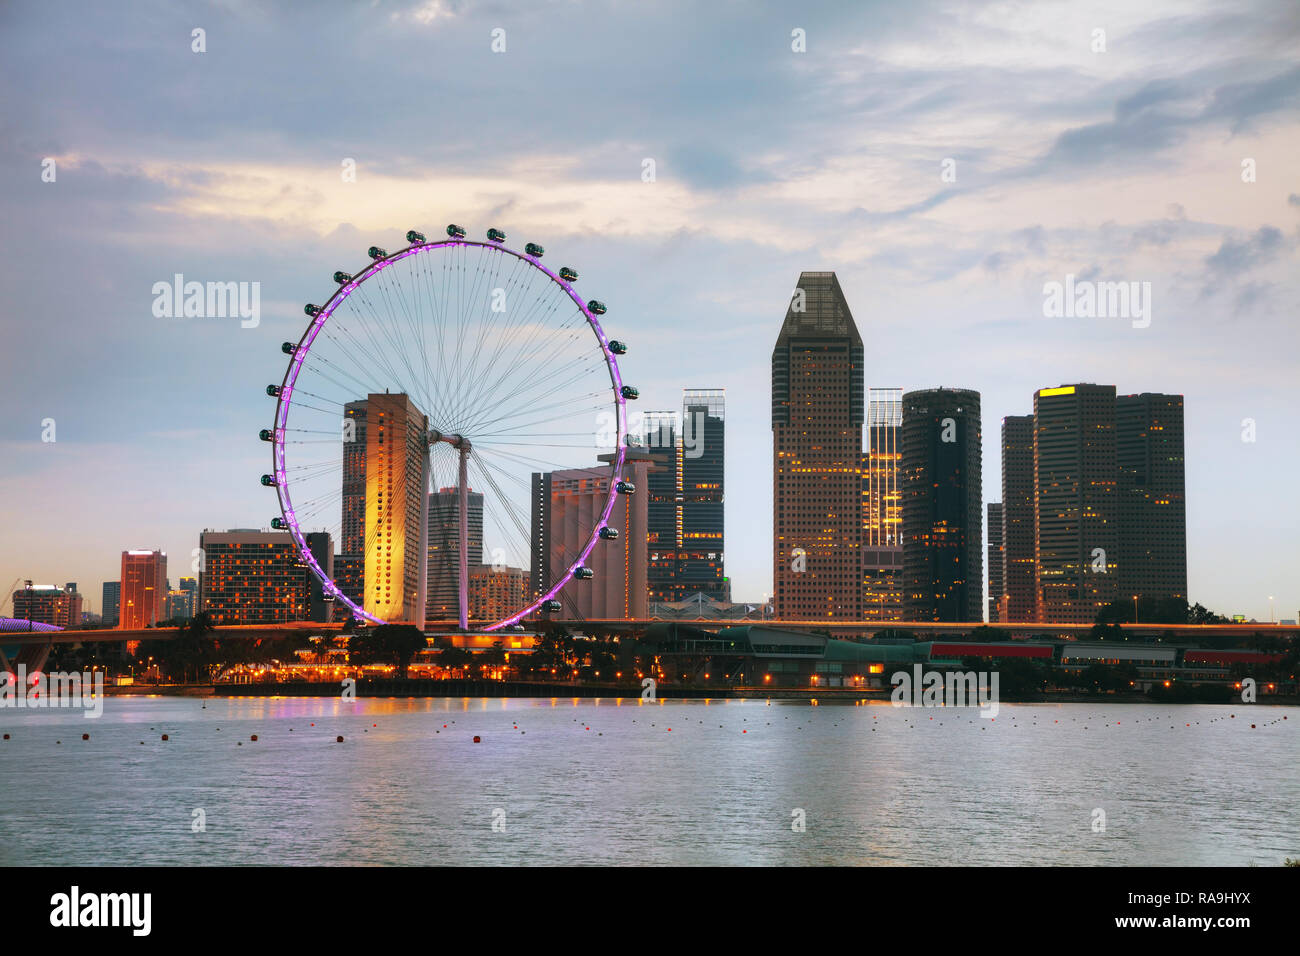 Downtown Singapore as seen from the Marina Bay at night Stock Photo